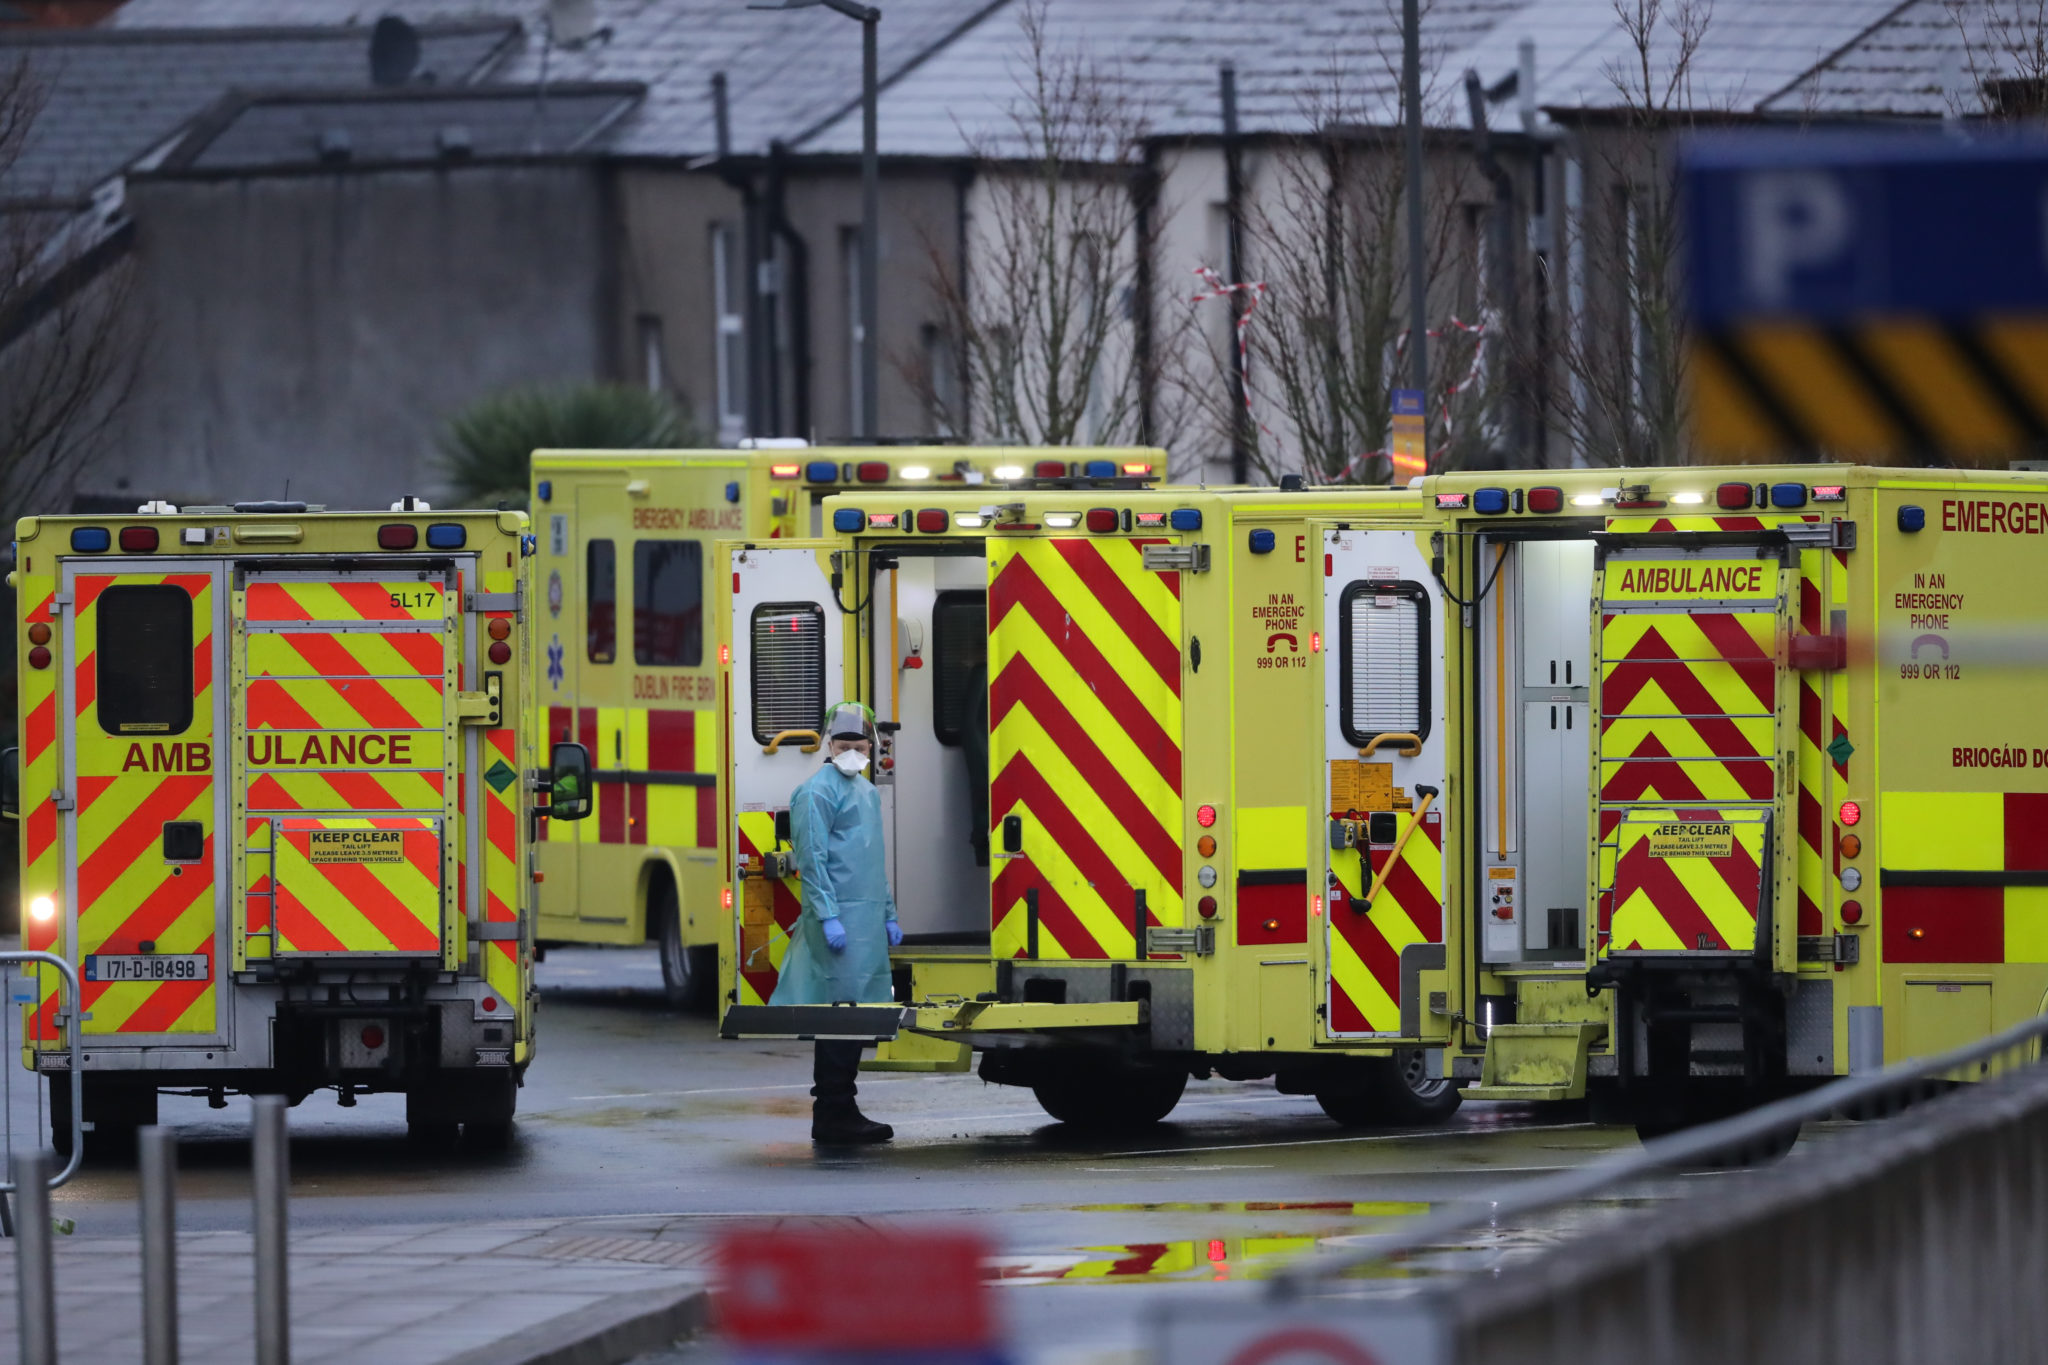 A medic in PPE and ambulances outside the Accident and Emergency department at the Mater Hospital in Dublin in January